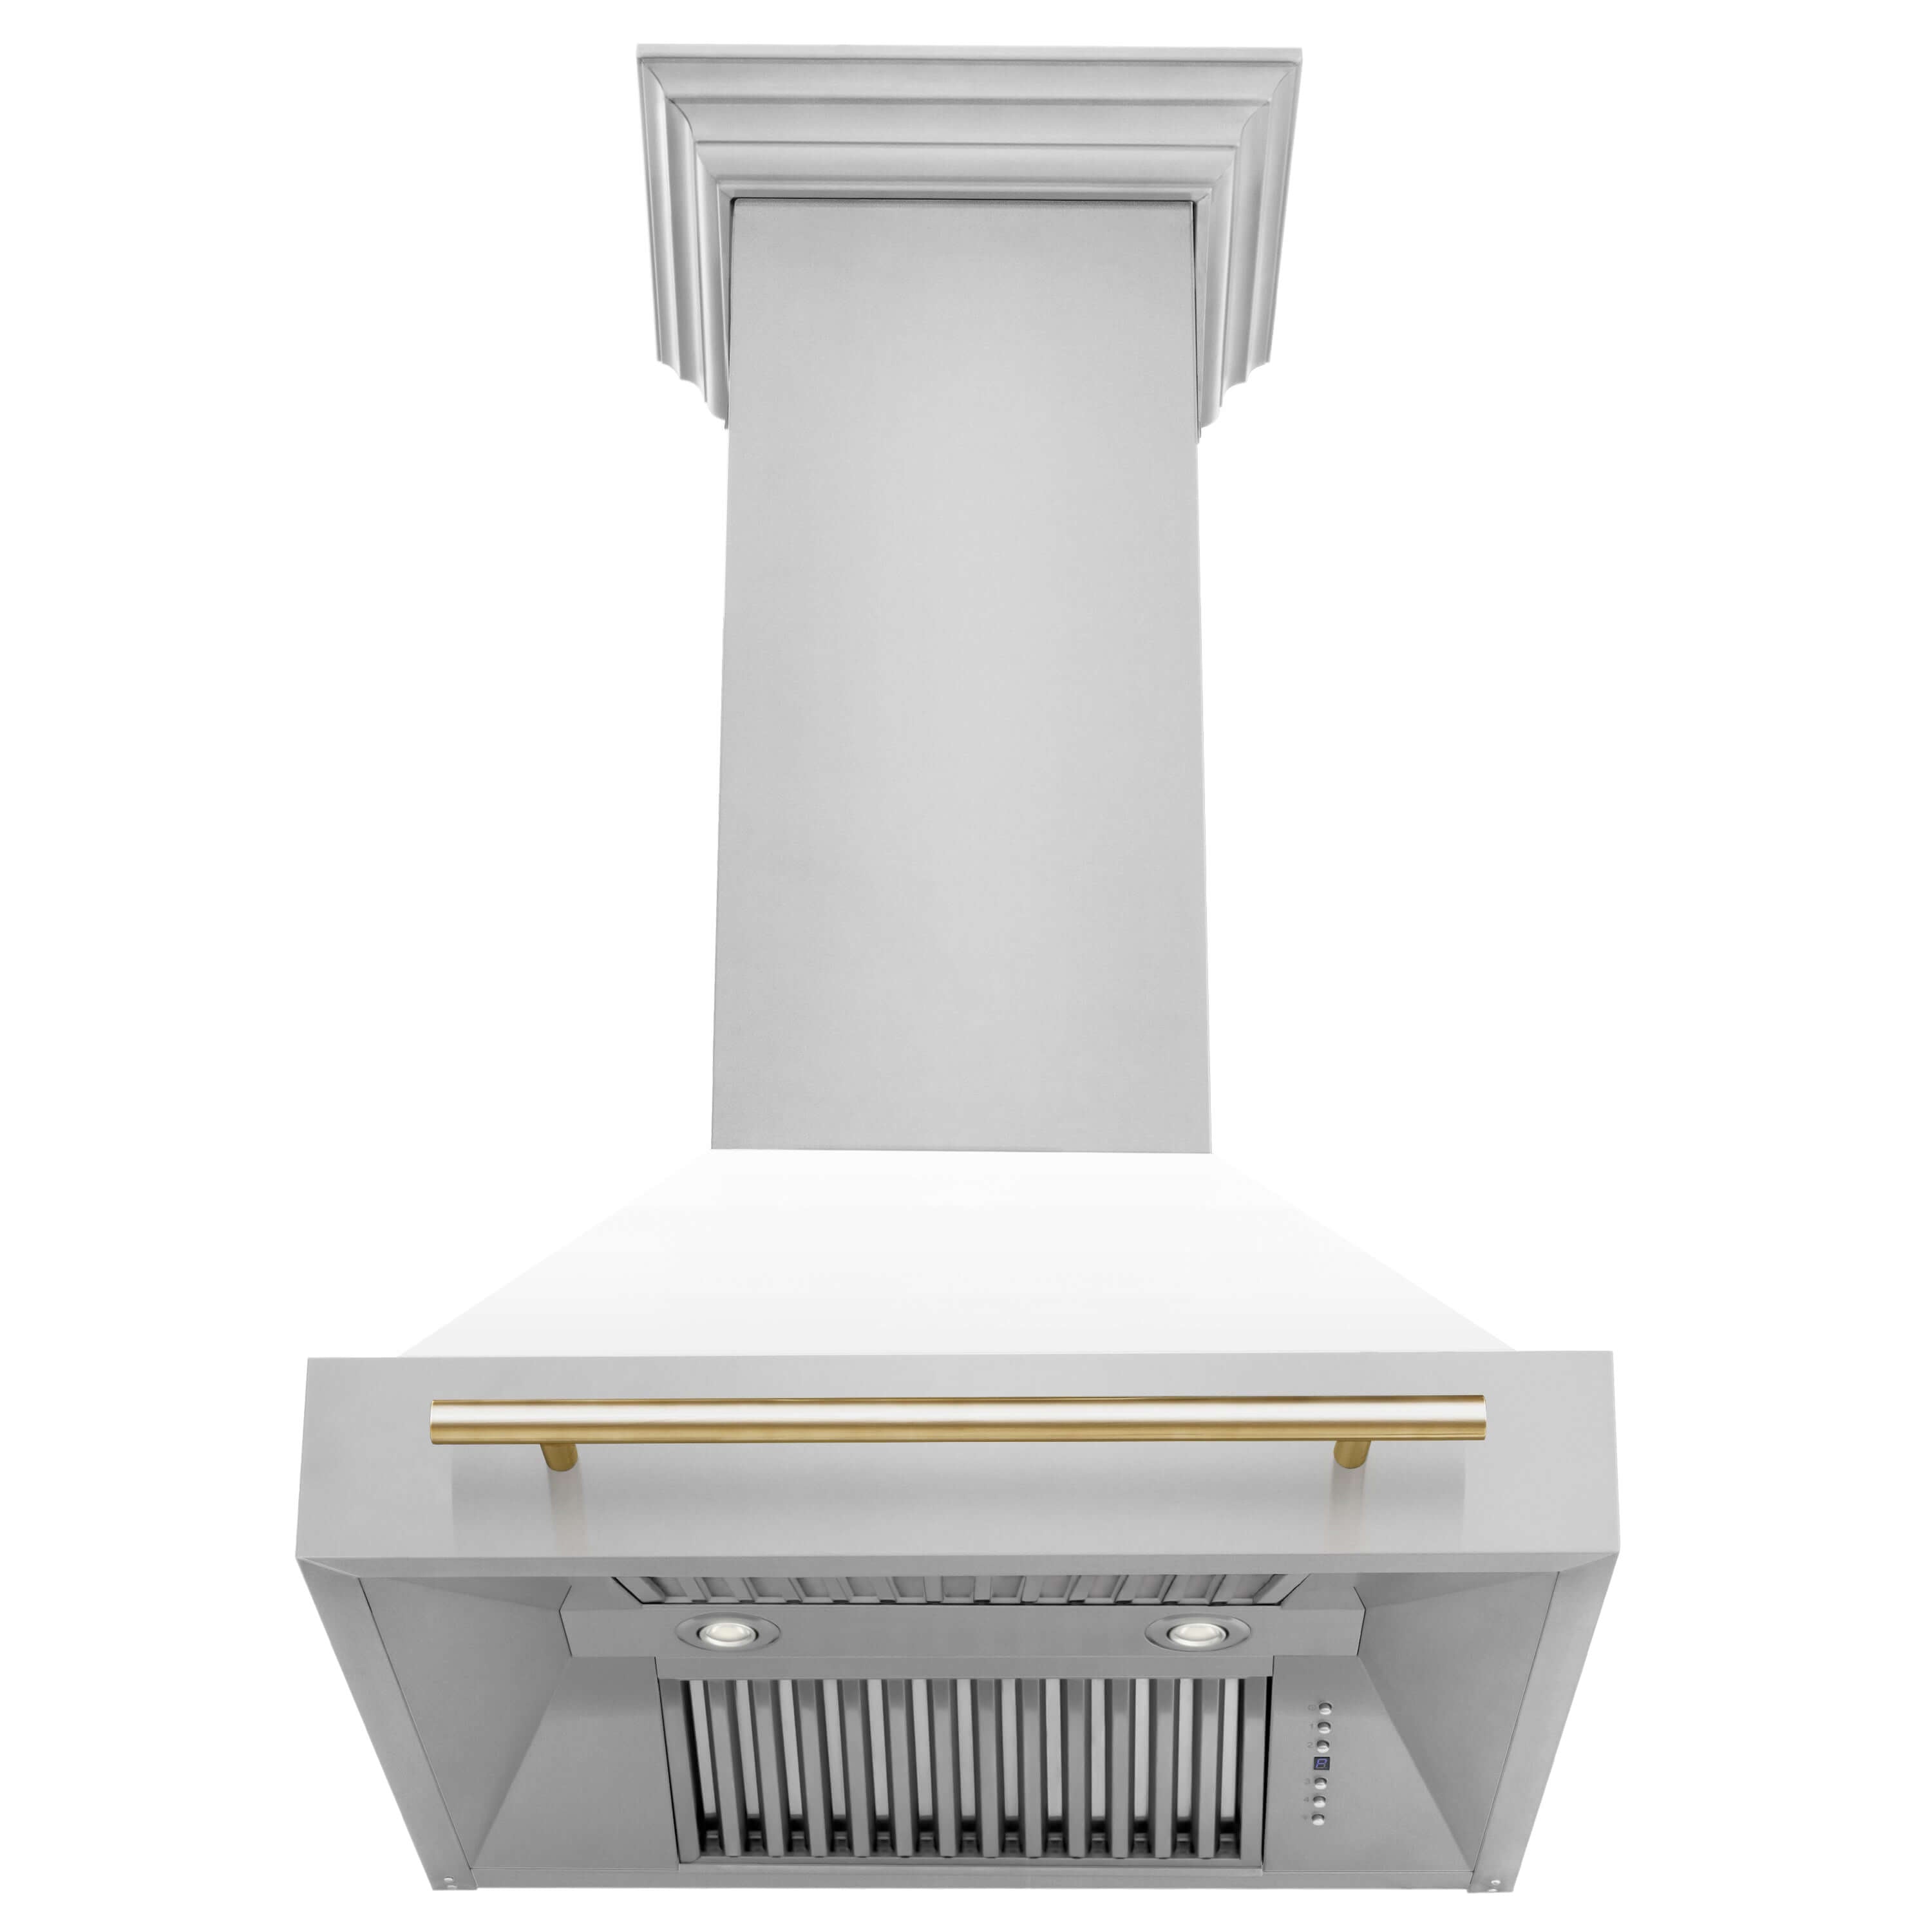 ZLINE Autograph Edition 30" Range Hood with White Matte Shell and Polished Gold accents (8654STZ-WM30-G) front, under